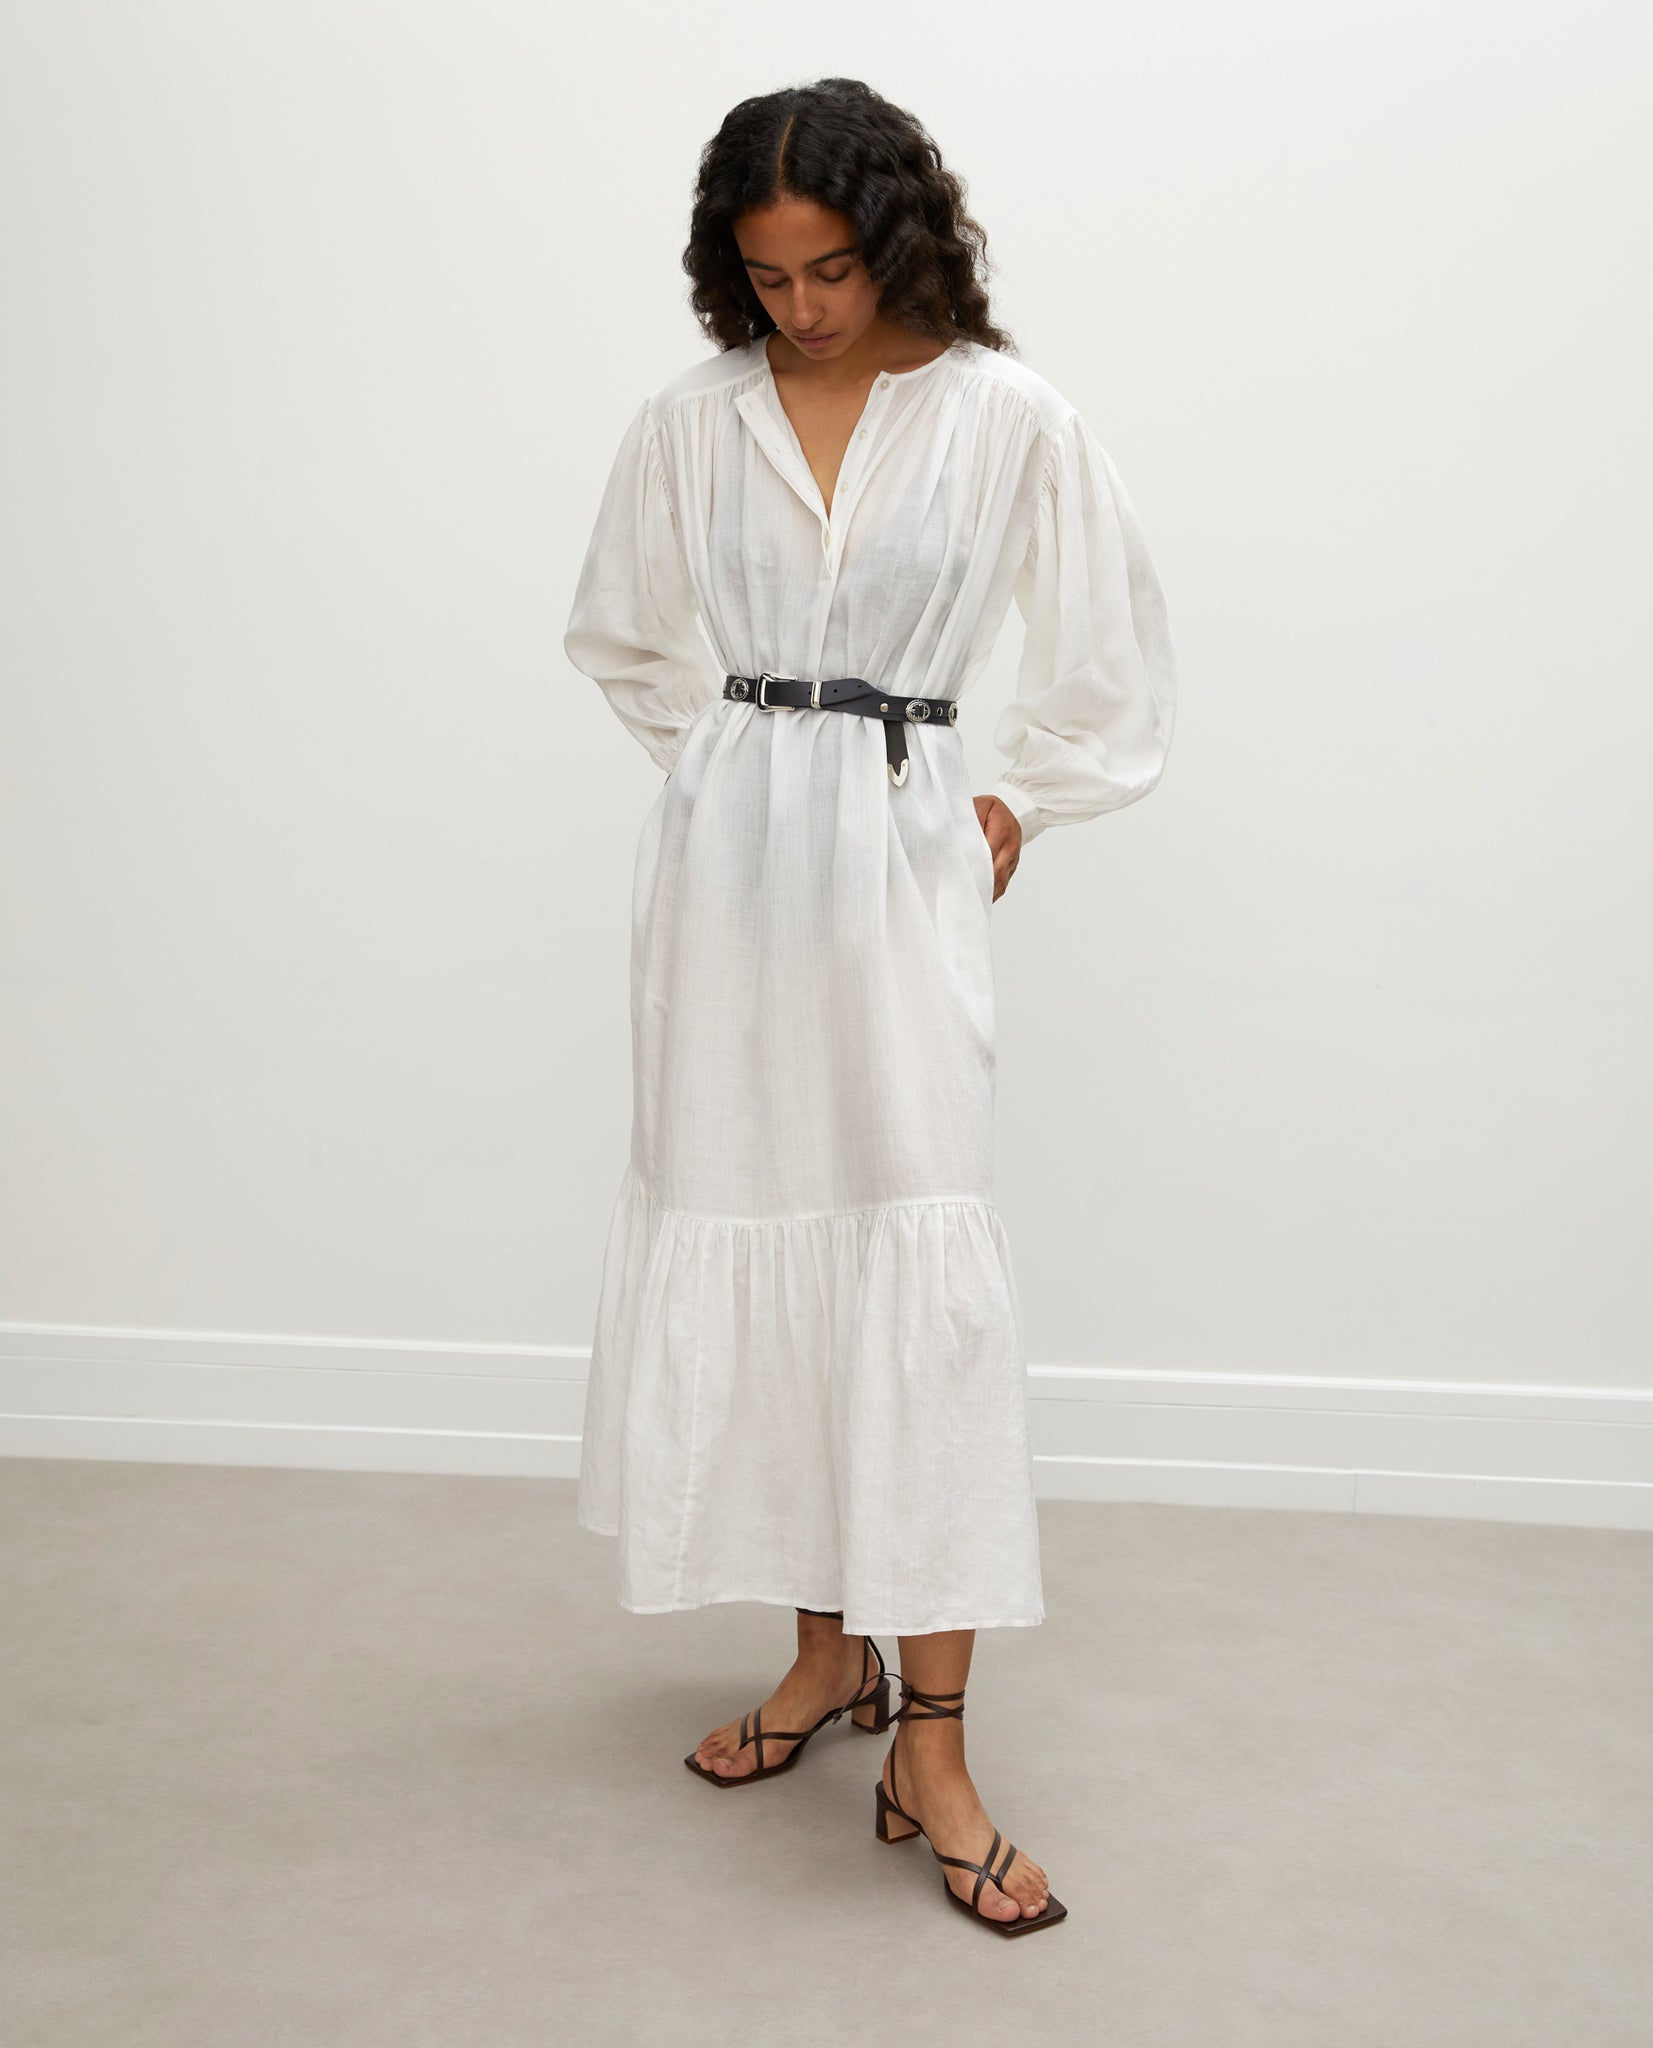 Linen Dress by Rohe Frames in white